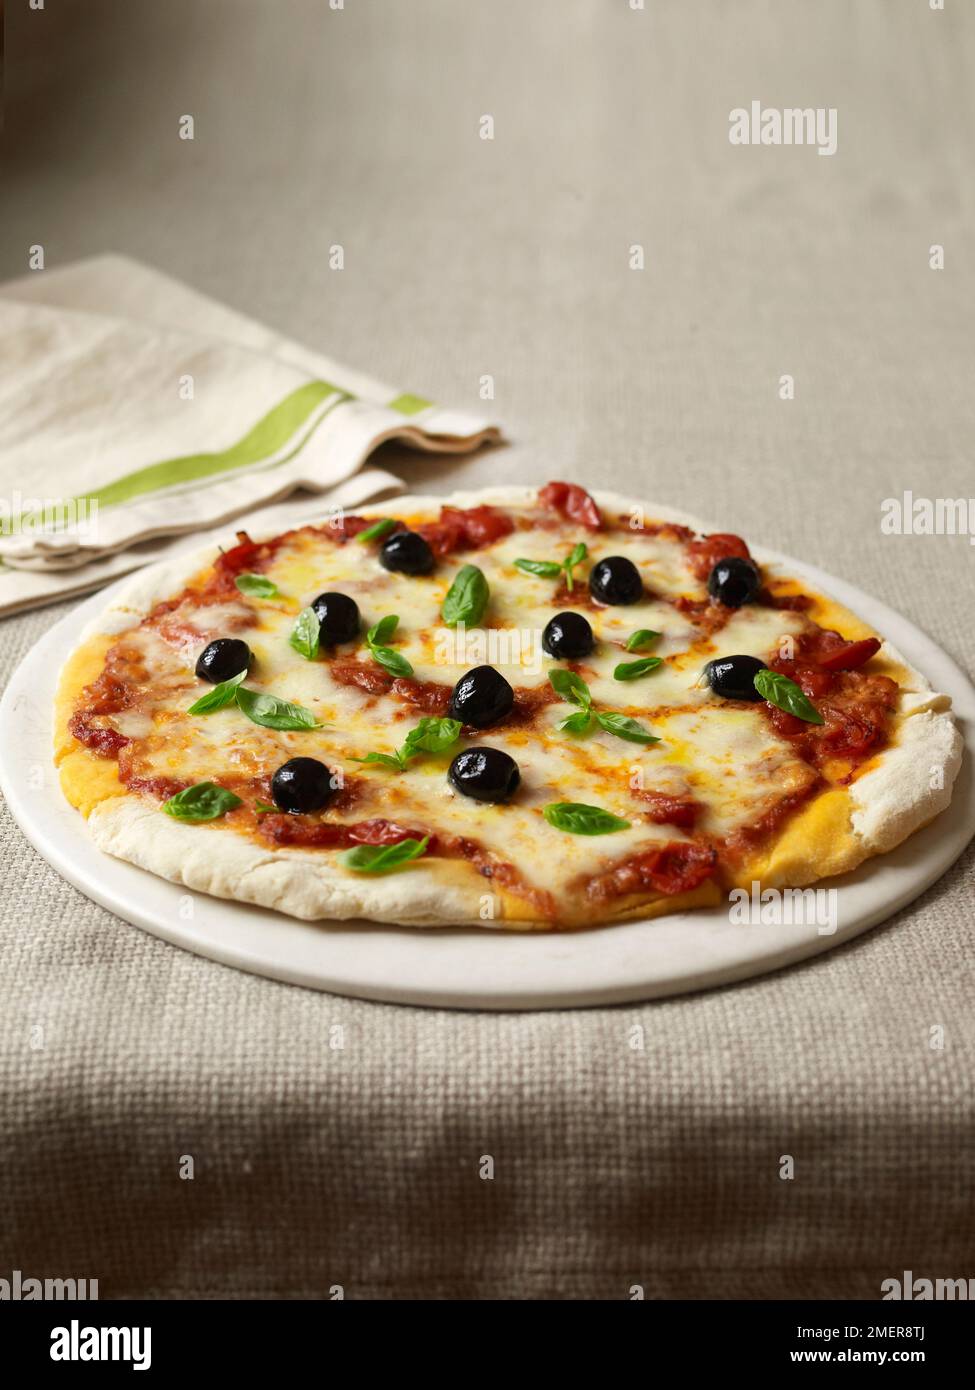 Gluten-free pizza with olives, basil and cheese Stock Photo